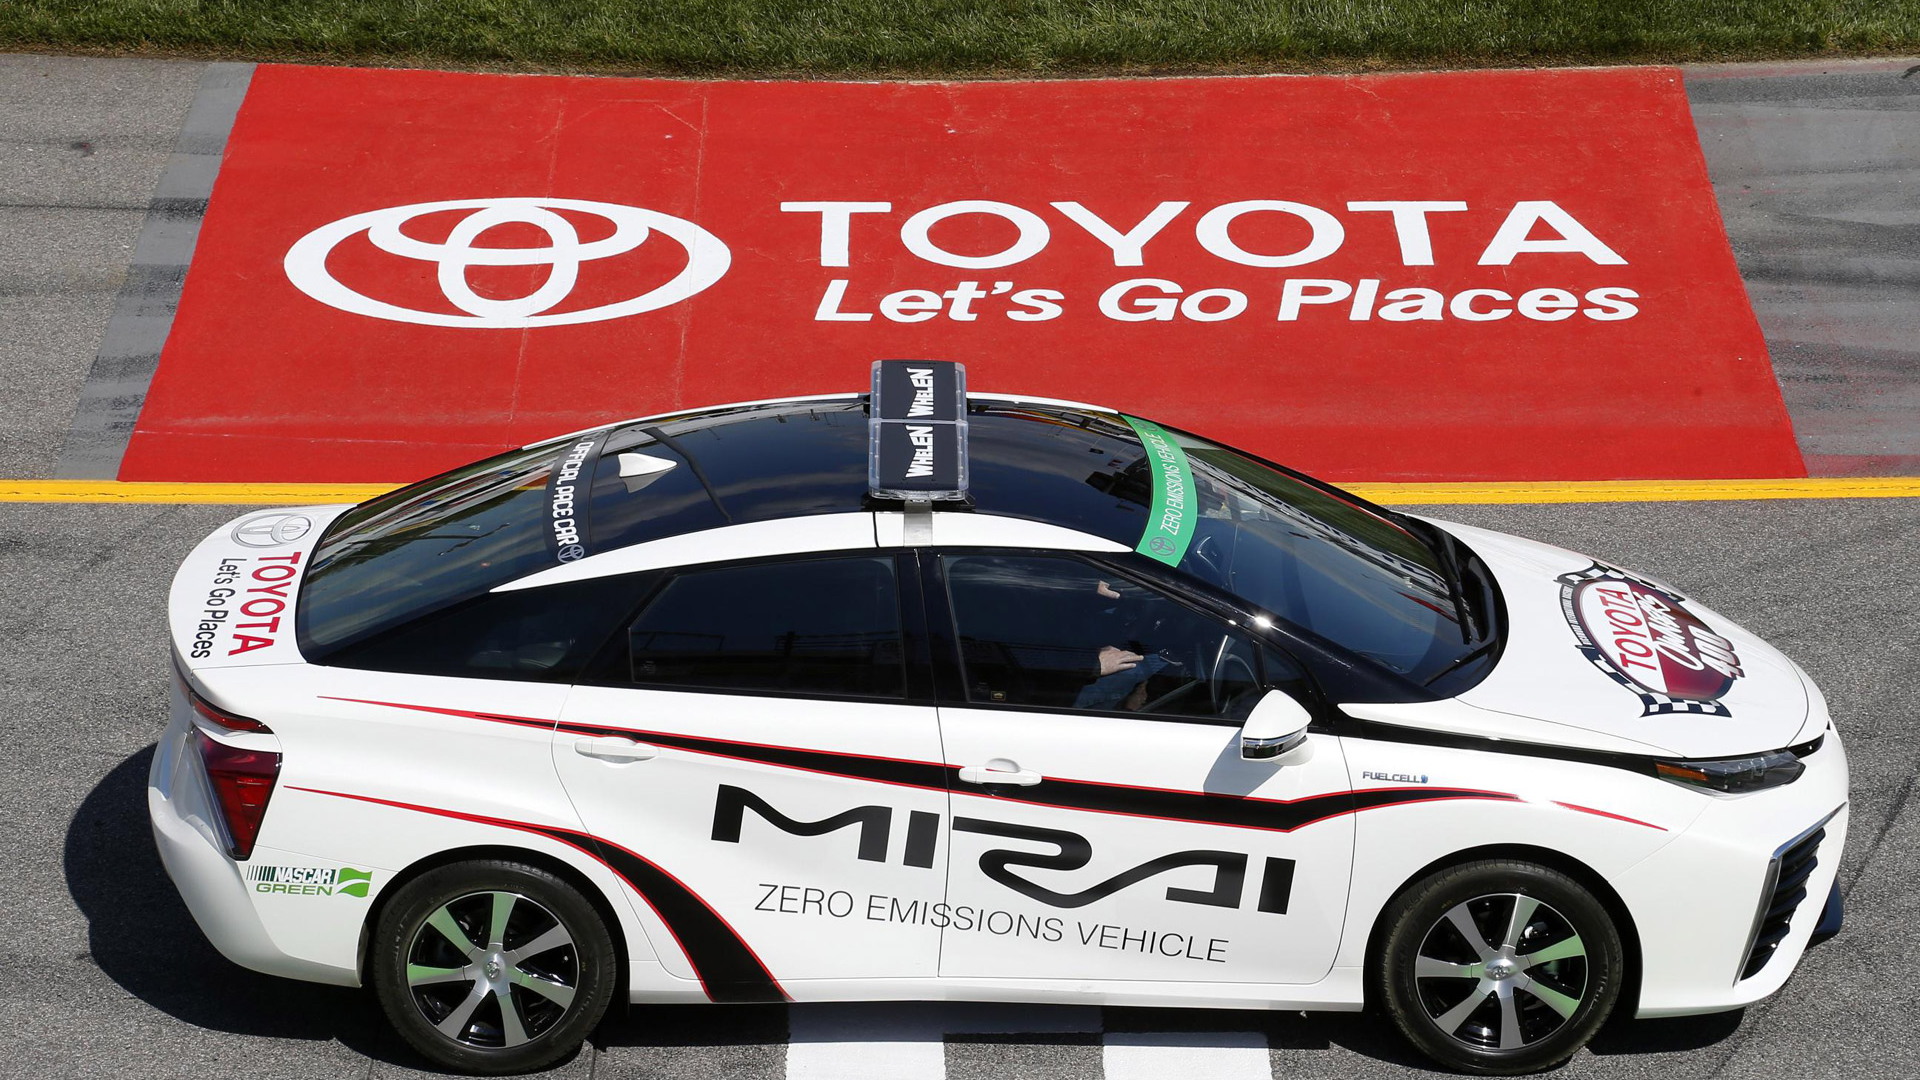 Toyota Mirai serves as official pace car for 2015 Toyota Owners 400 NASCAR Sprint Cup race